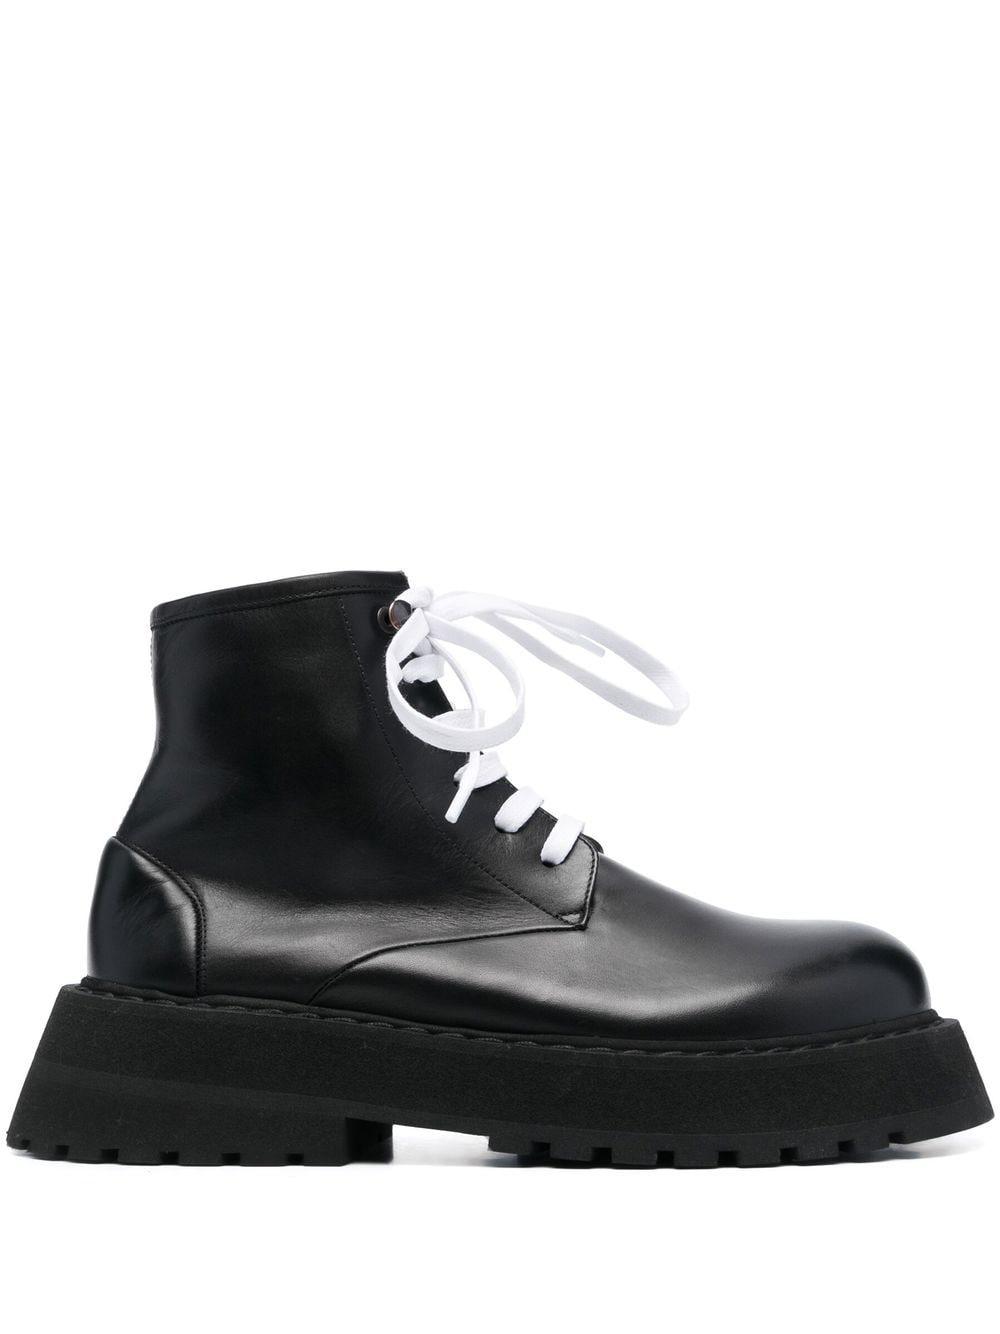 Marsèll Micarro Leather Platform Ankle Boots in Black | Lyst